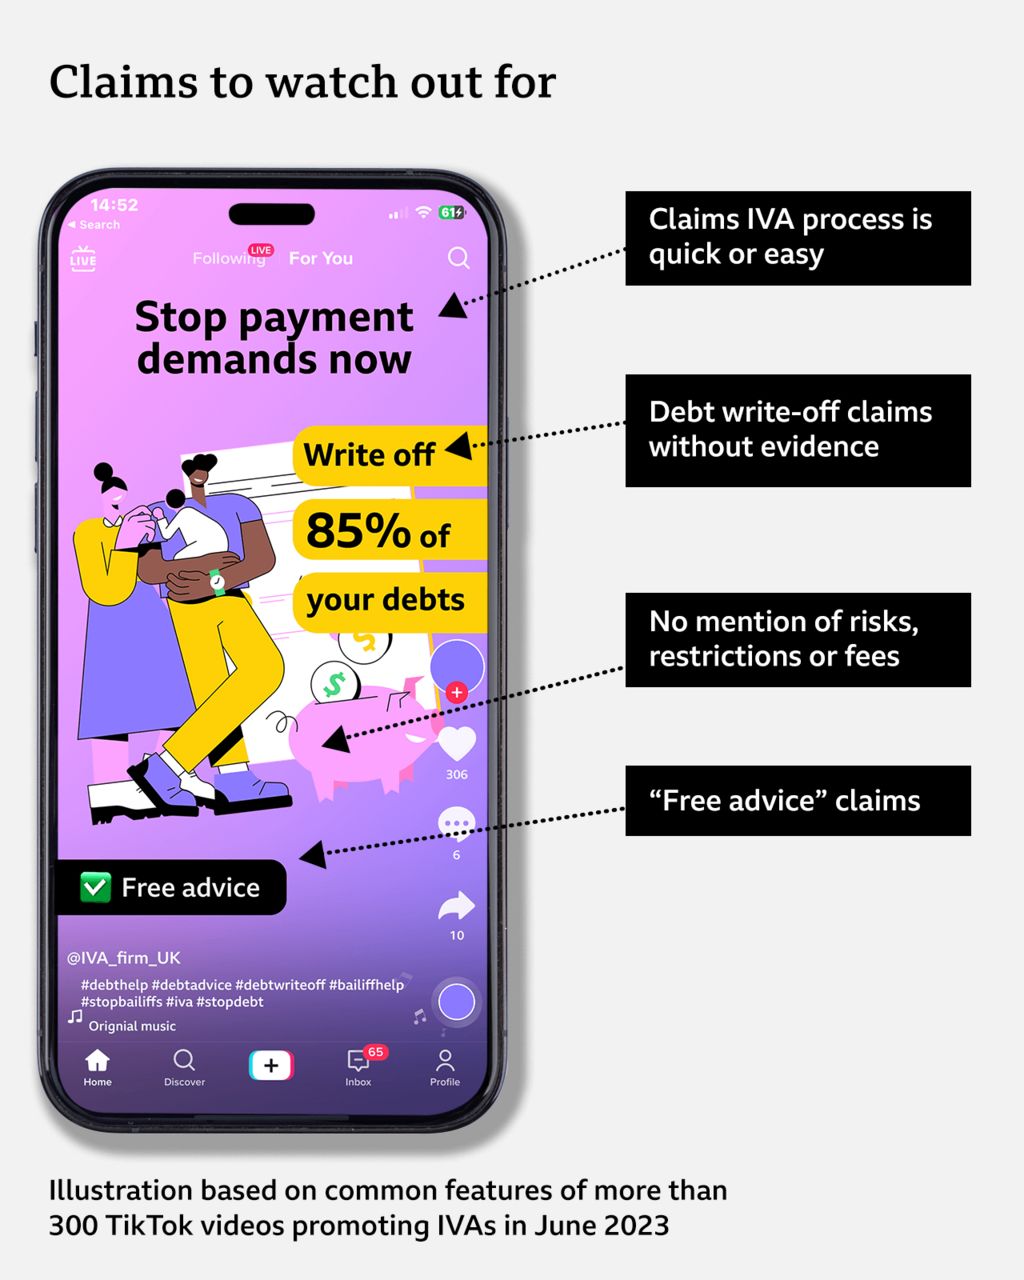 An illustration of a TikTok video indicating IVA claims to watch out for. This includes "debt write-off claims without evidence", "free advice claims", "claims IVA process is quick or easy" and "no mention of risks, restrictions or fees"